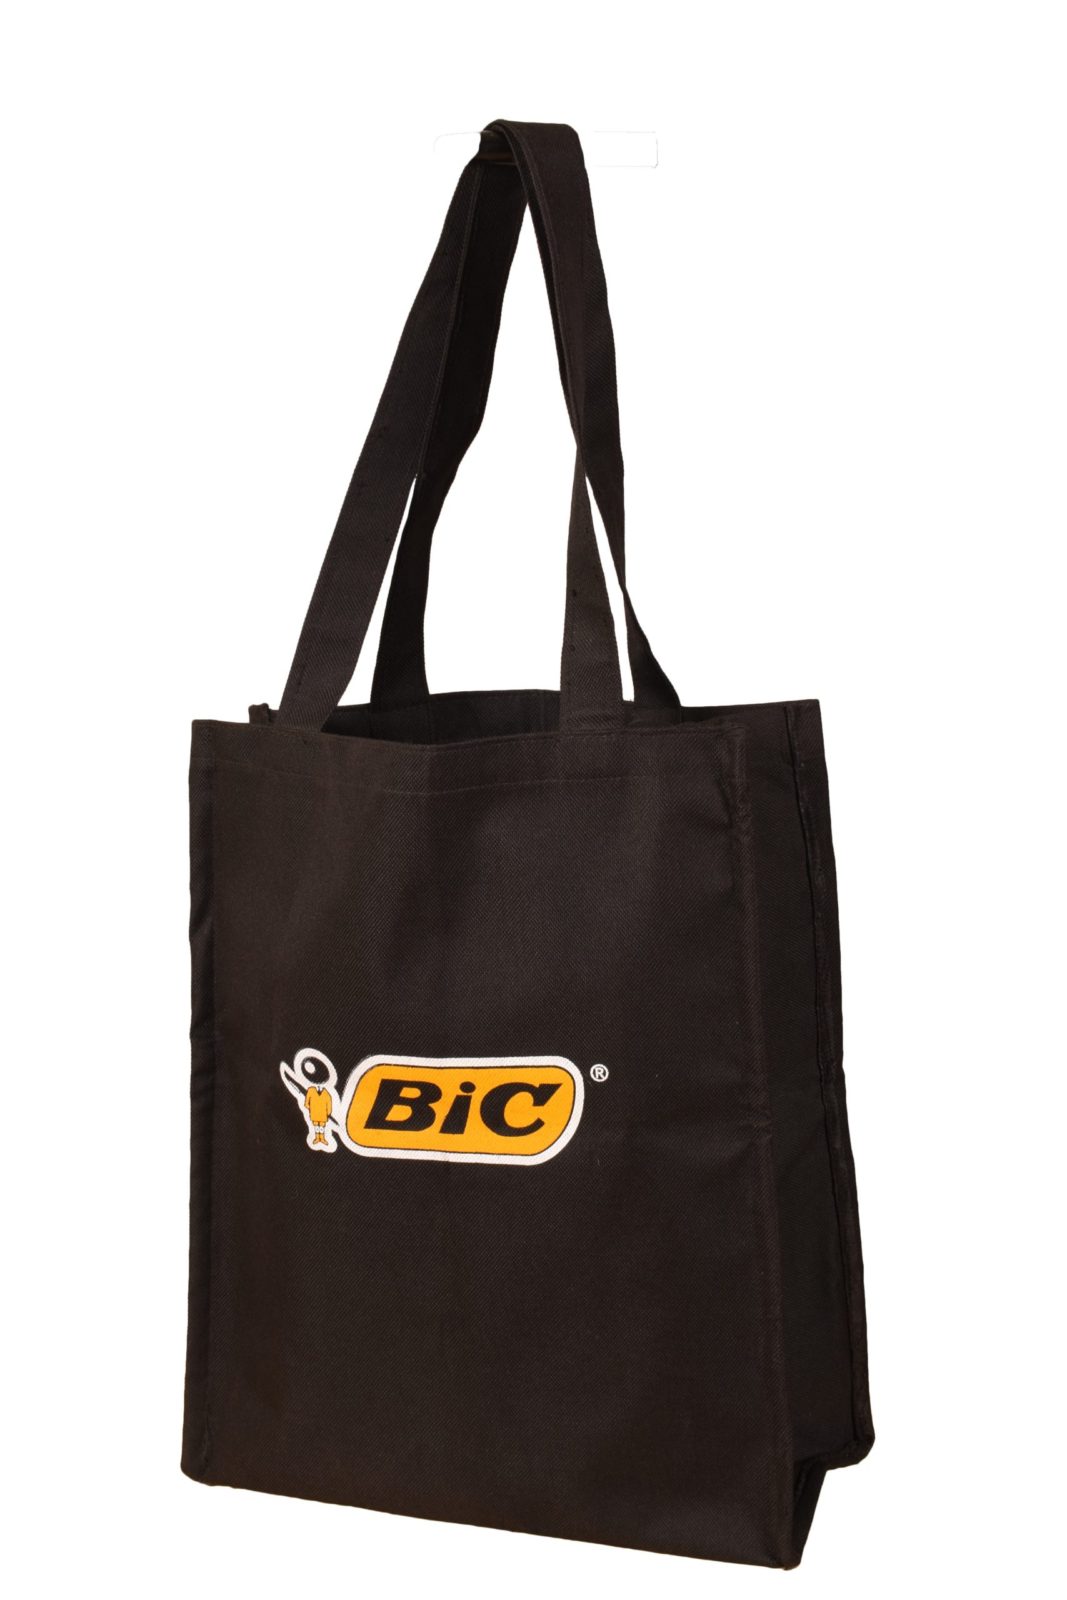 Bic-Branded Carrier Bag for Corporate - African Bravo Creative